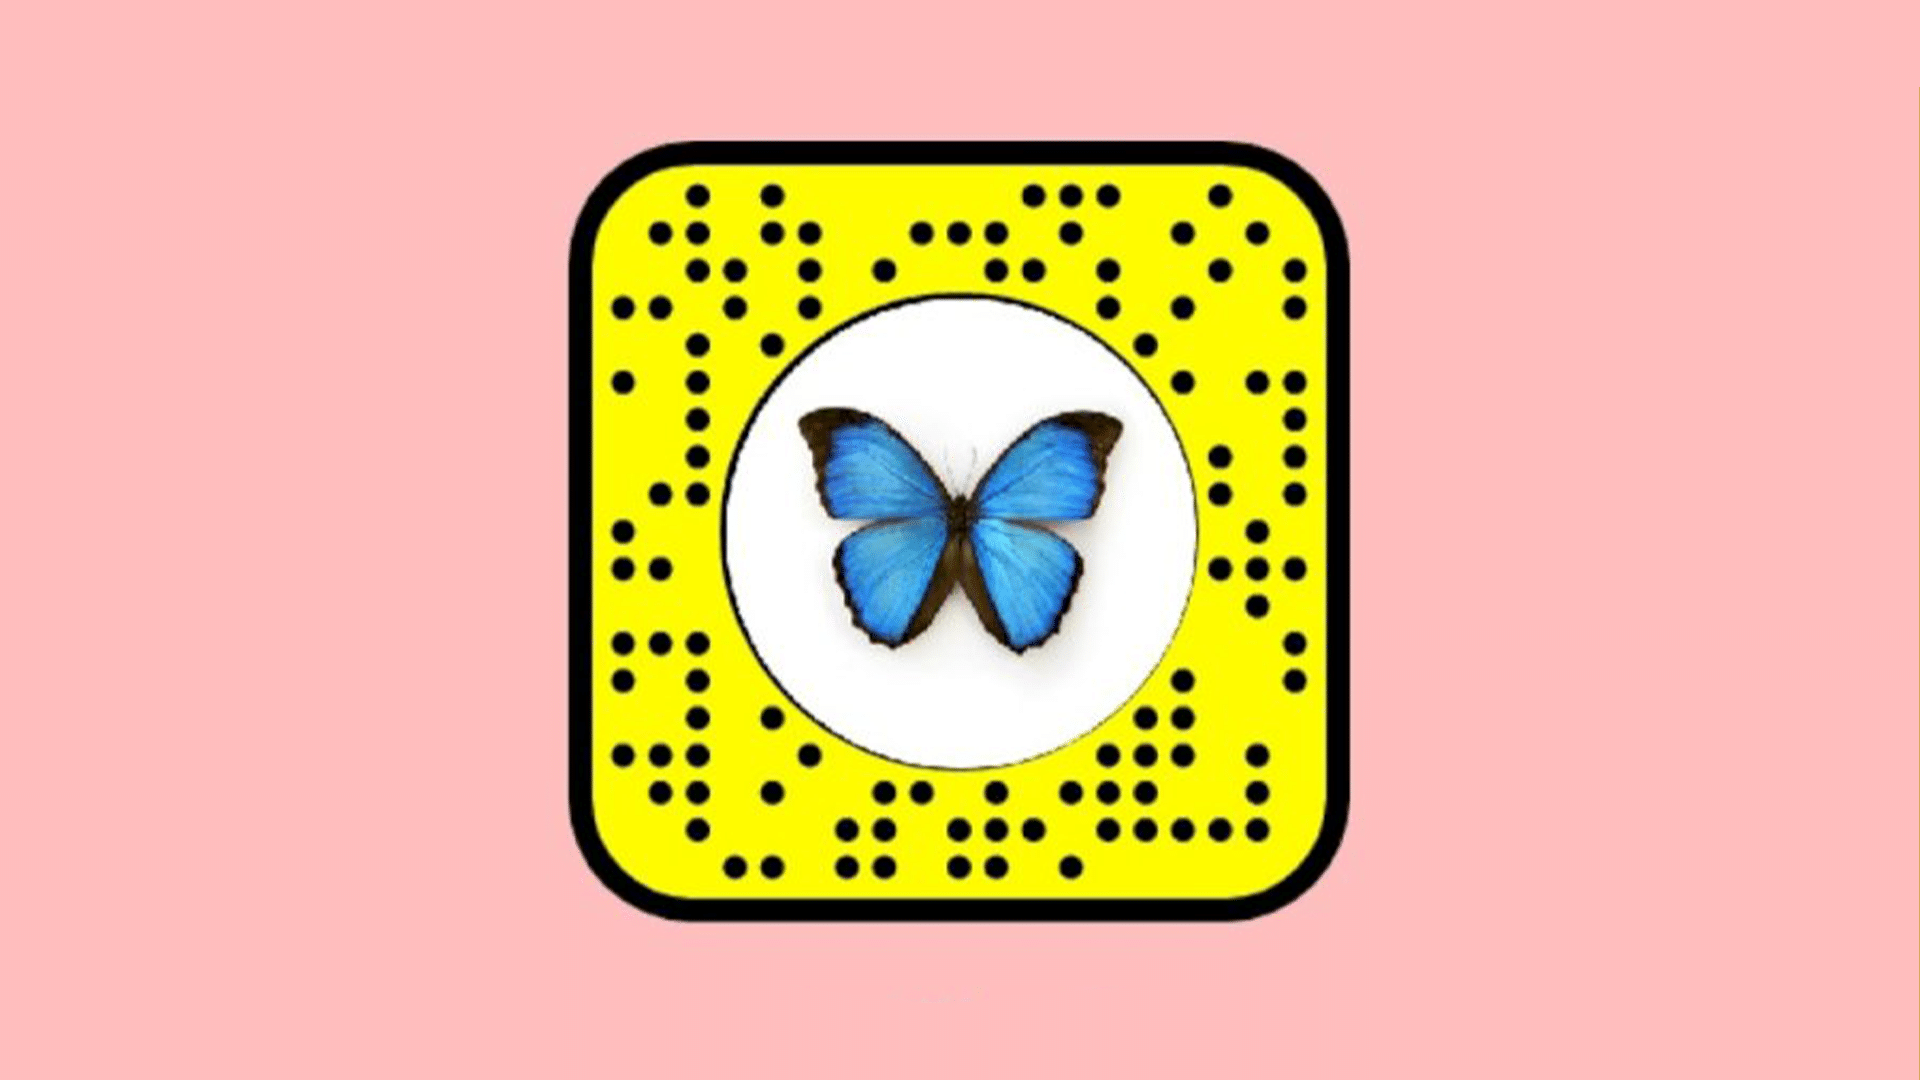 Butterfly Lens on Snapchat